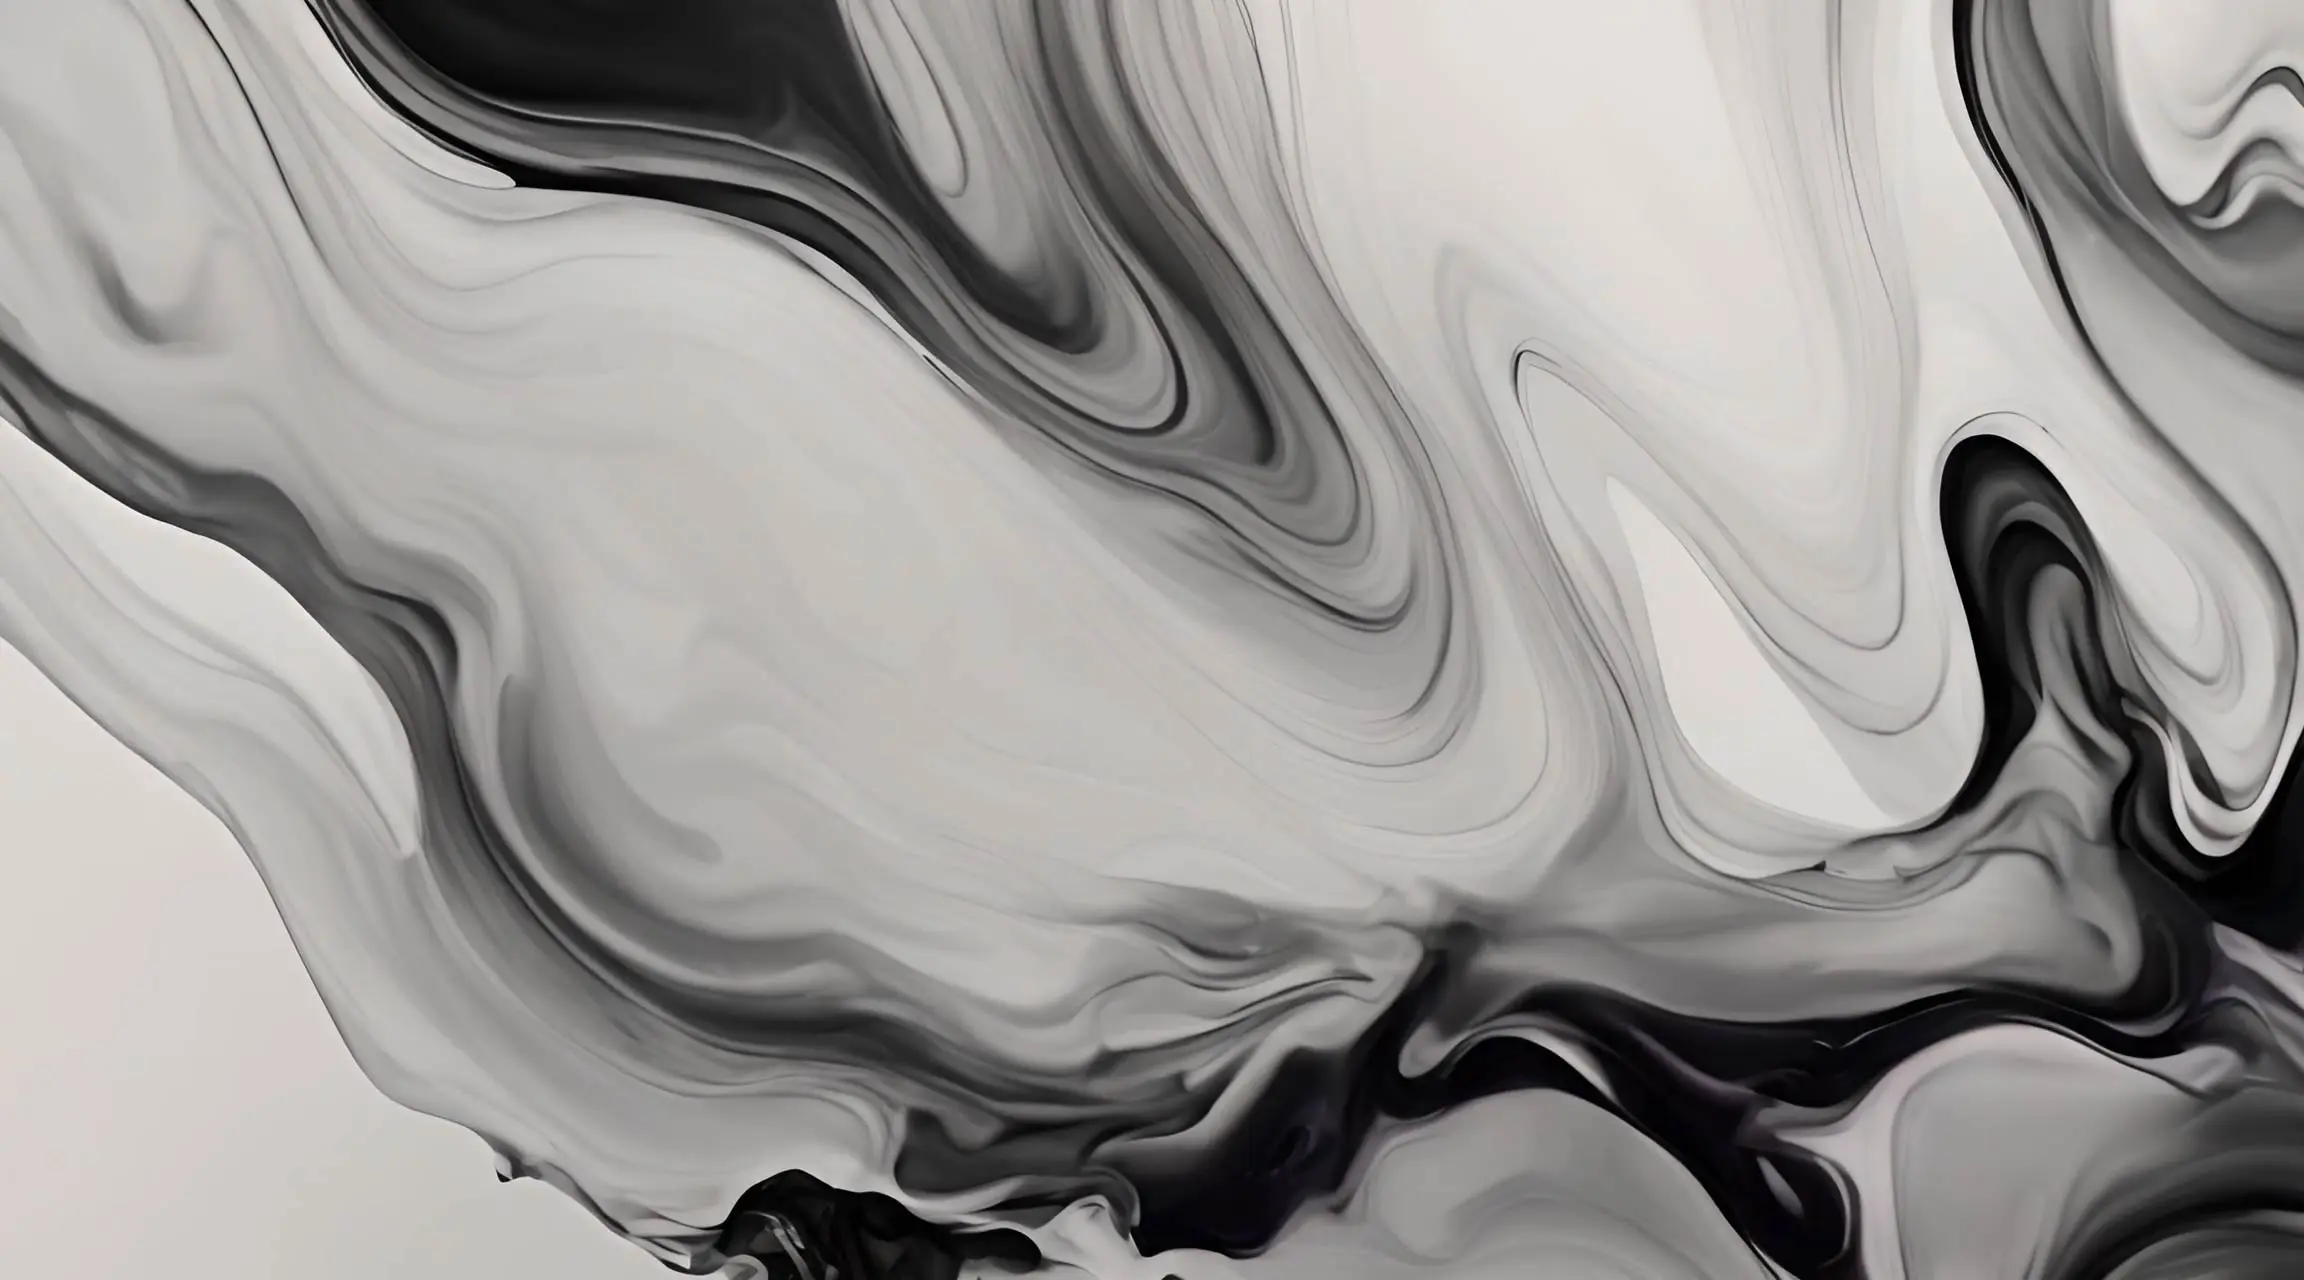 Dynamic Swirls of Black and White Artistic Video Backdrop